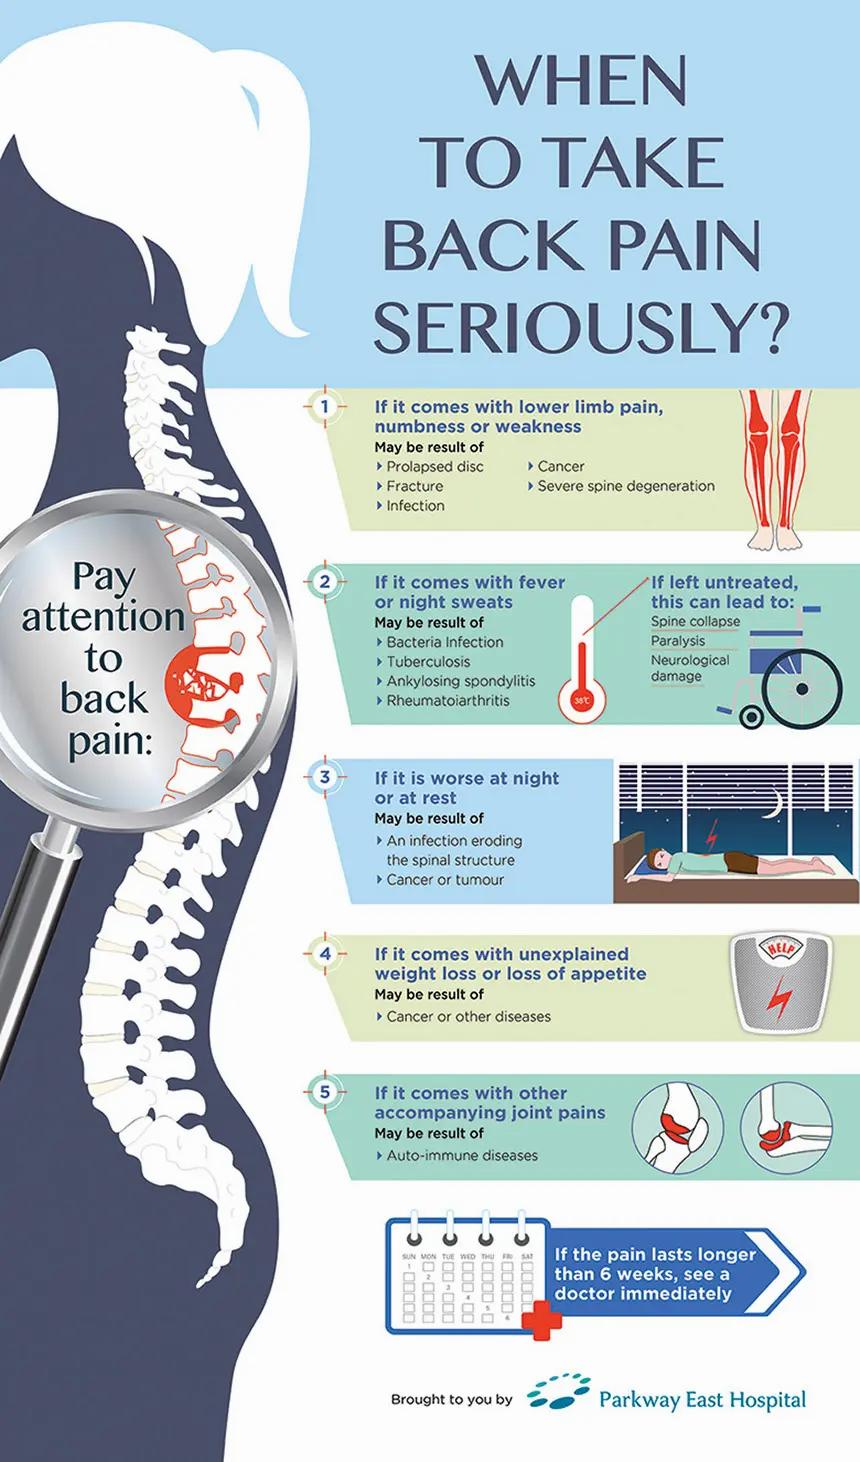 Infographic on when to take back pain seriously, listing 5 scenarios where it could be a sign of a serious underlying condition.